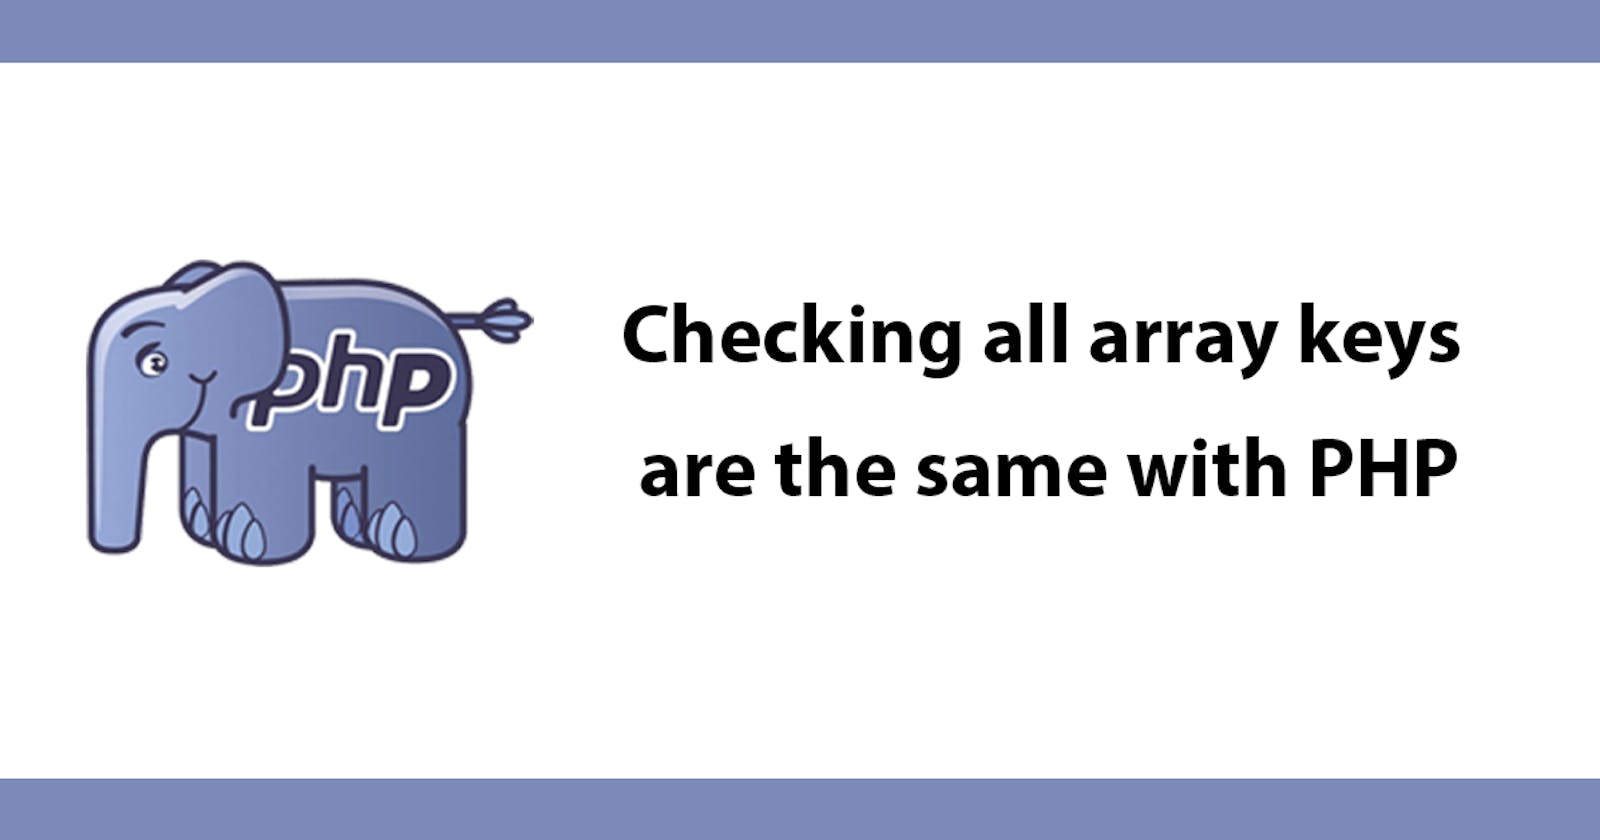 Checking all array keys are the same with PHP